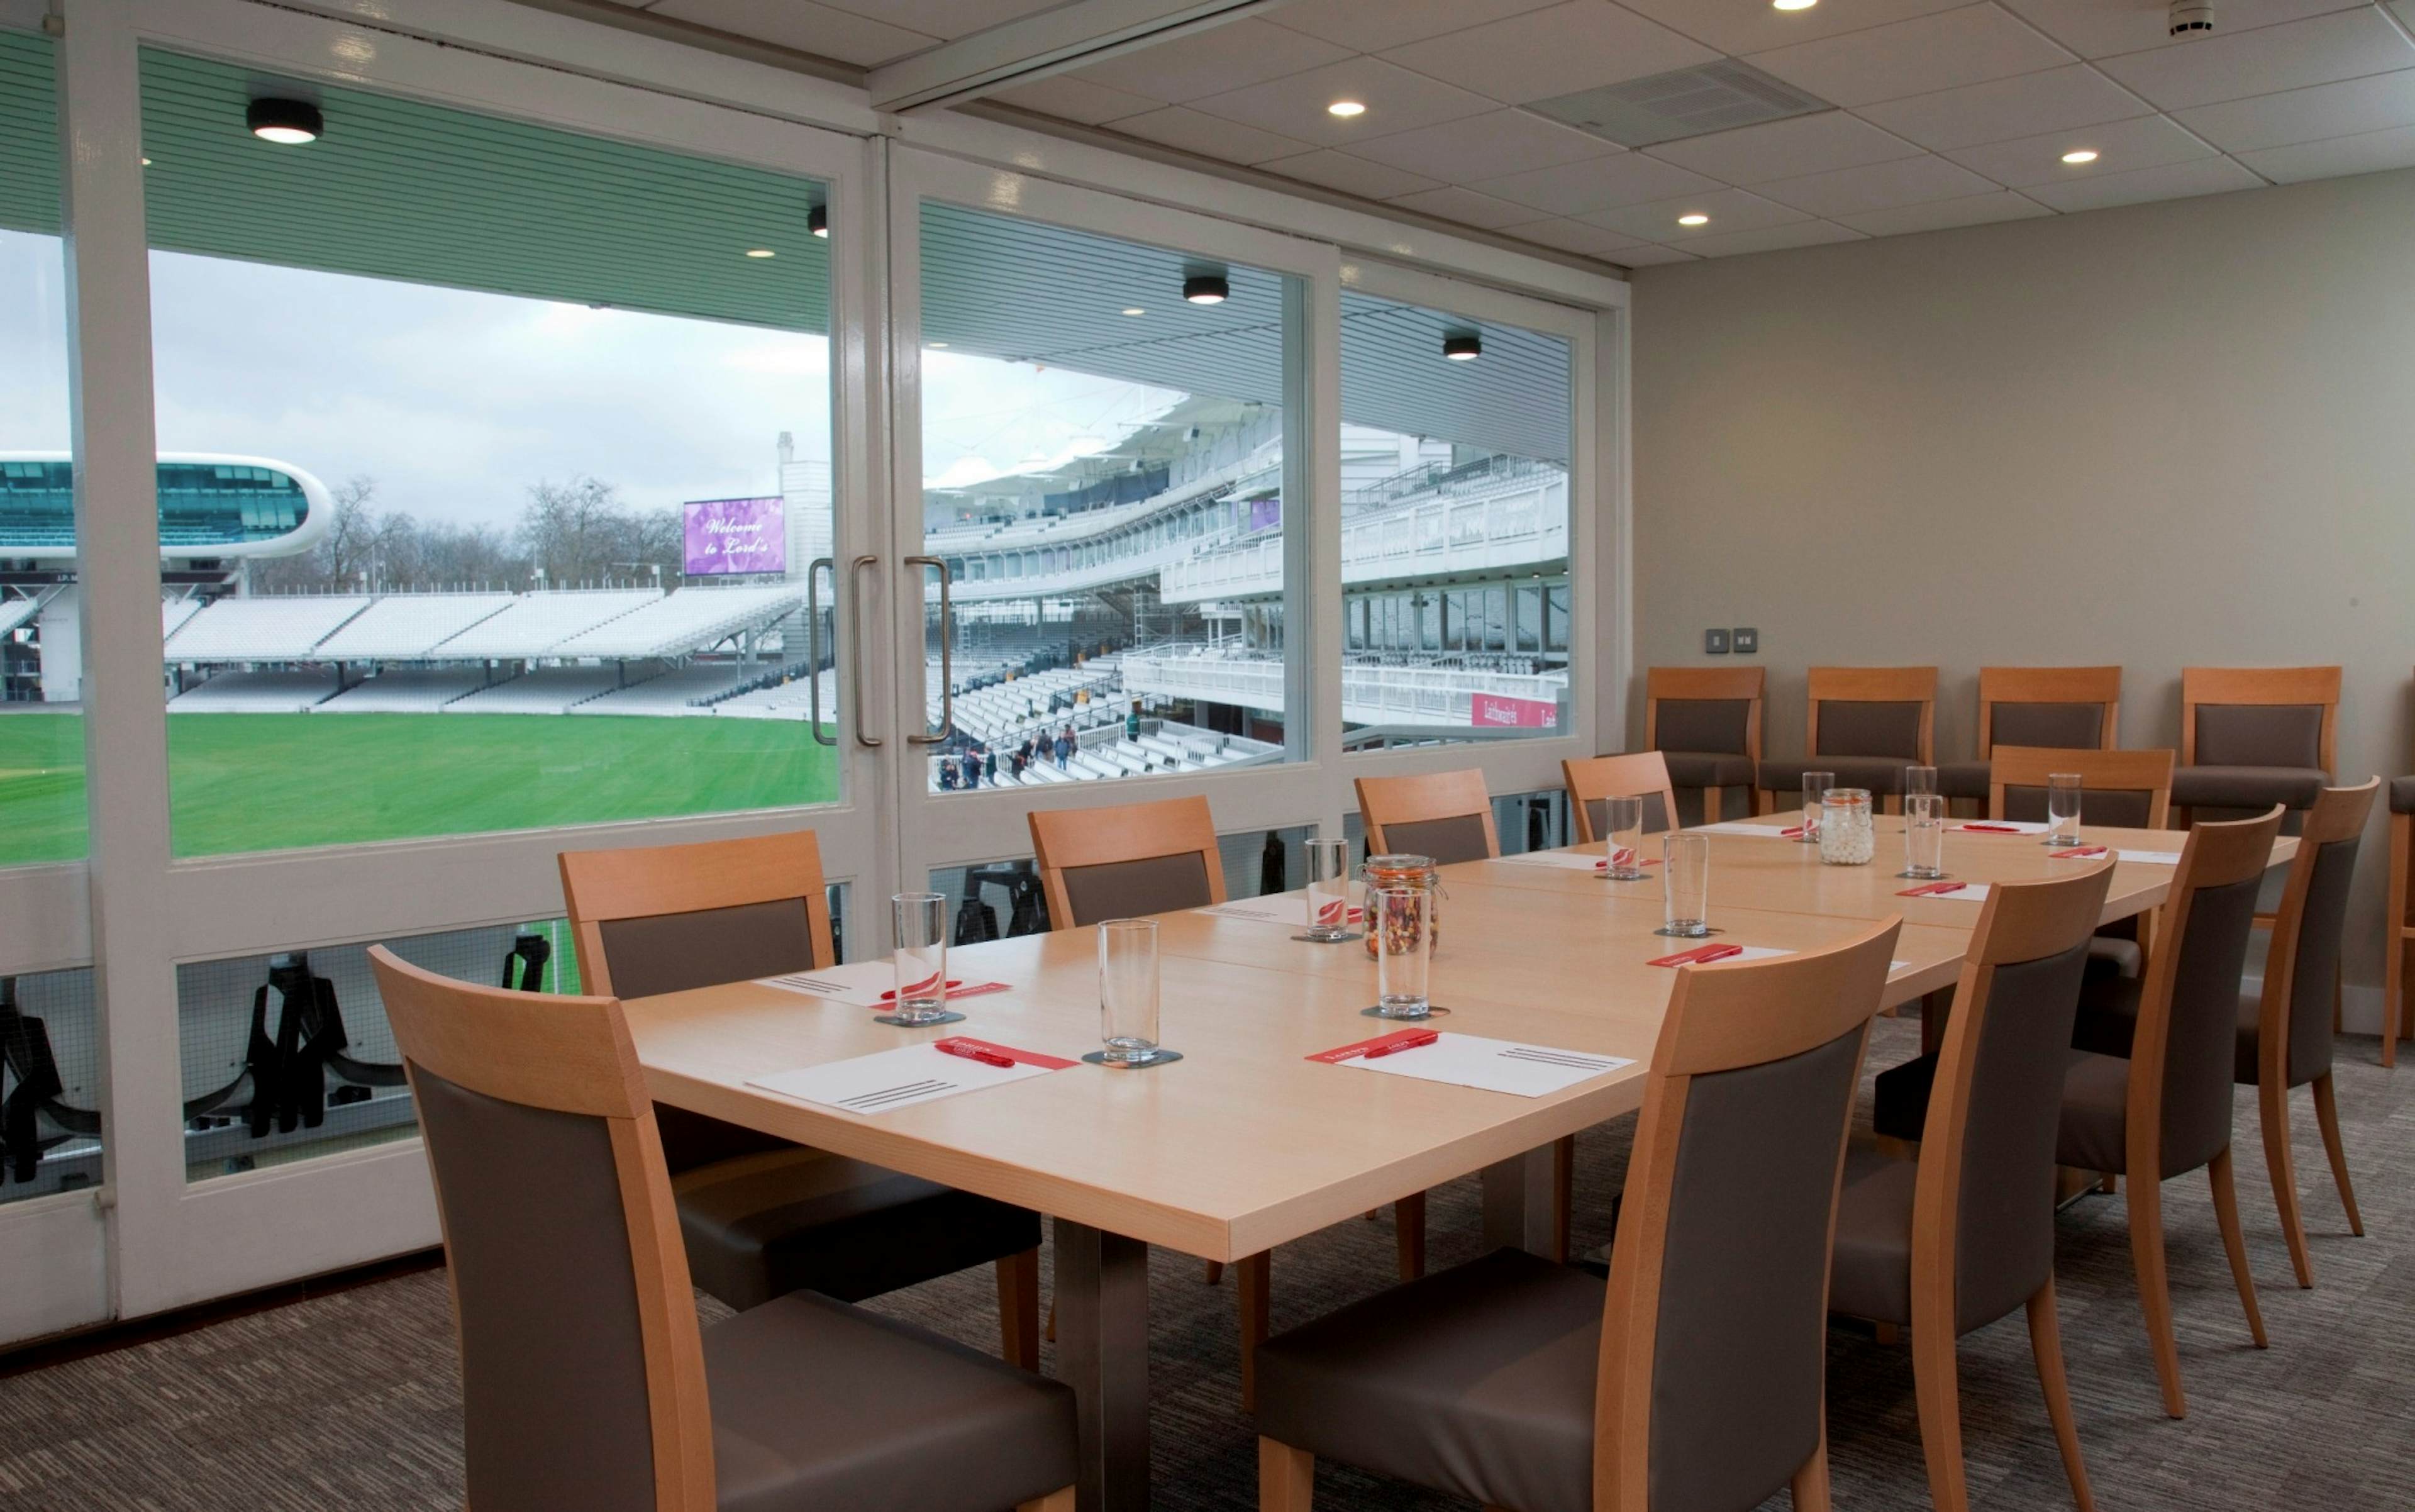 Lord's Cricket Ground - Tavern Meeting Rooms image 1